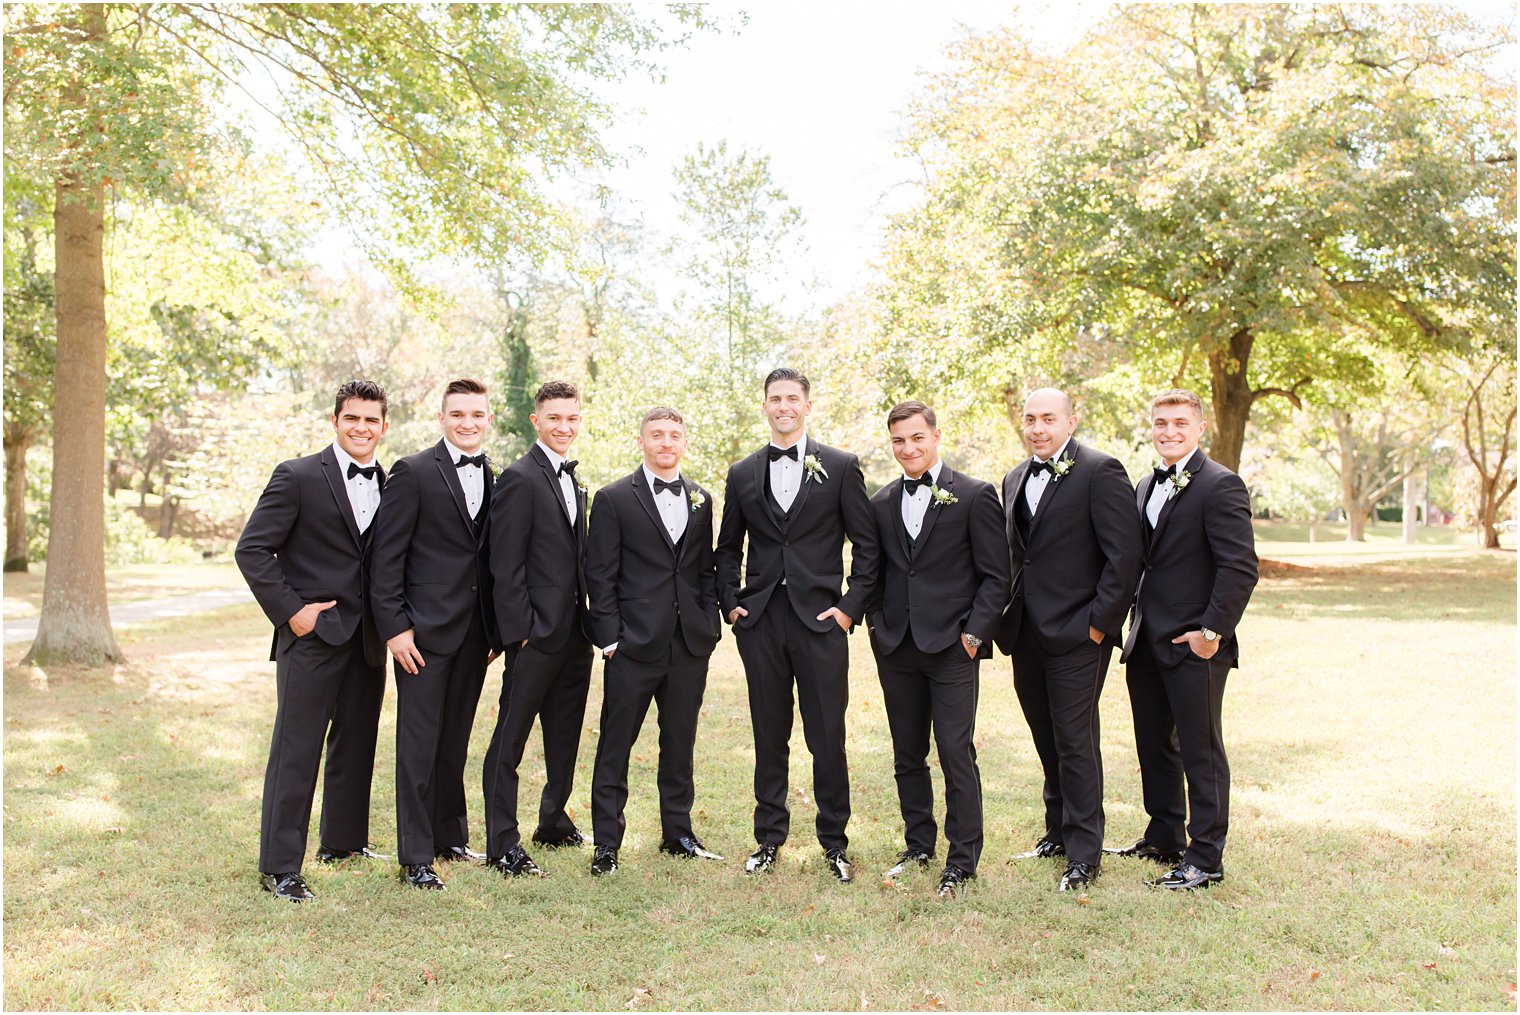 groom poses with groomsmen in classic suits